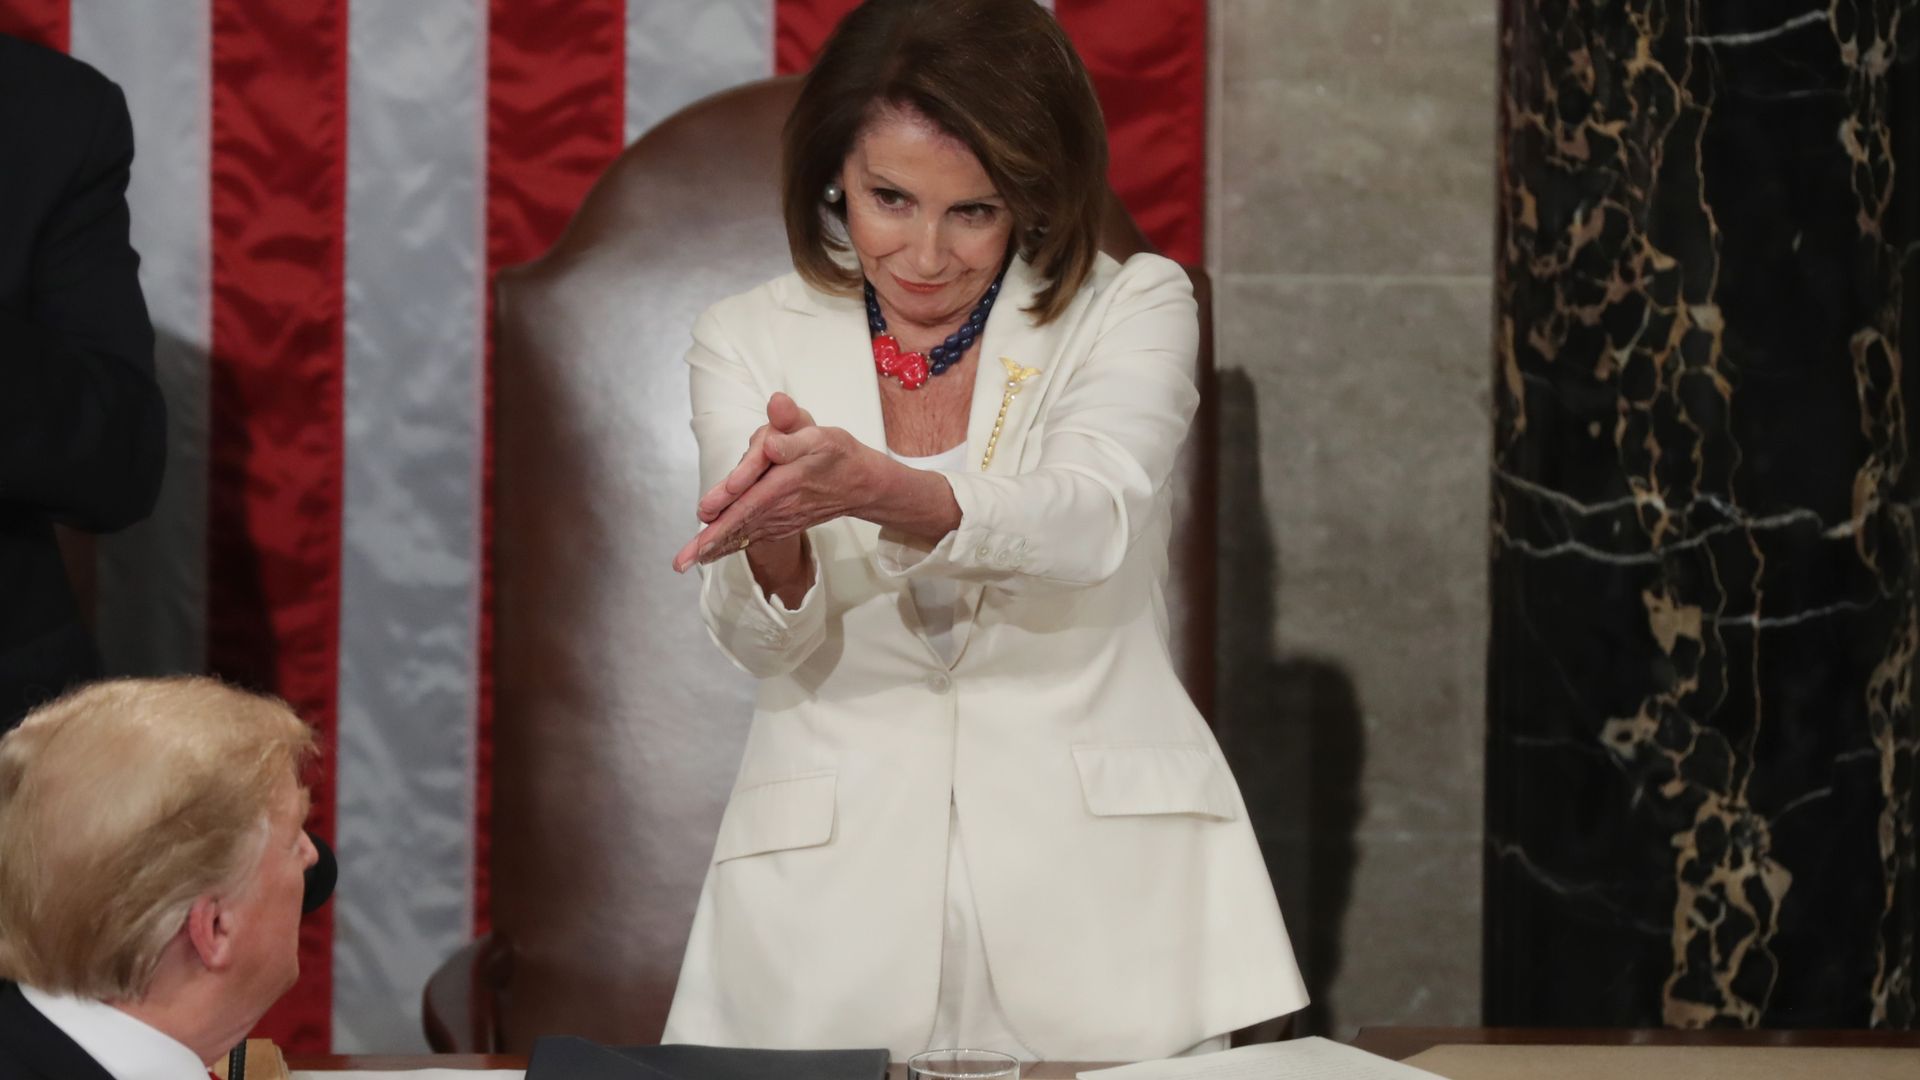 Instant classic from this year's State of the Union (Photo: Chip Somodevilla/Getty Images)